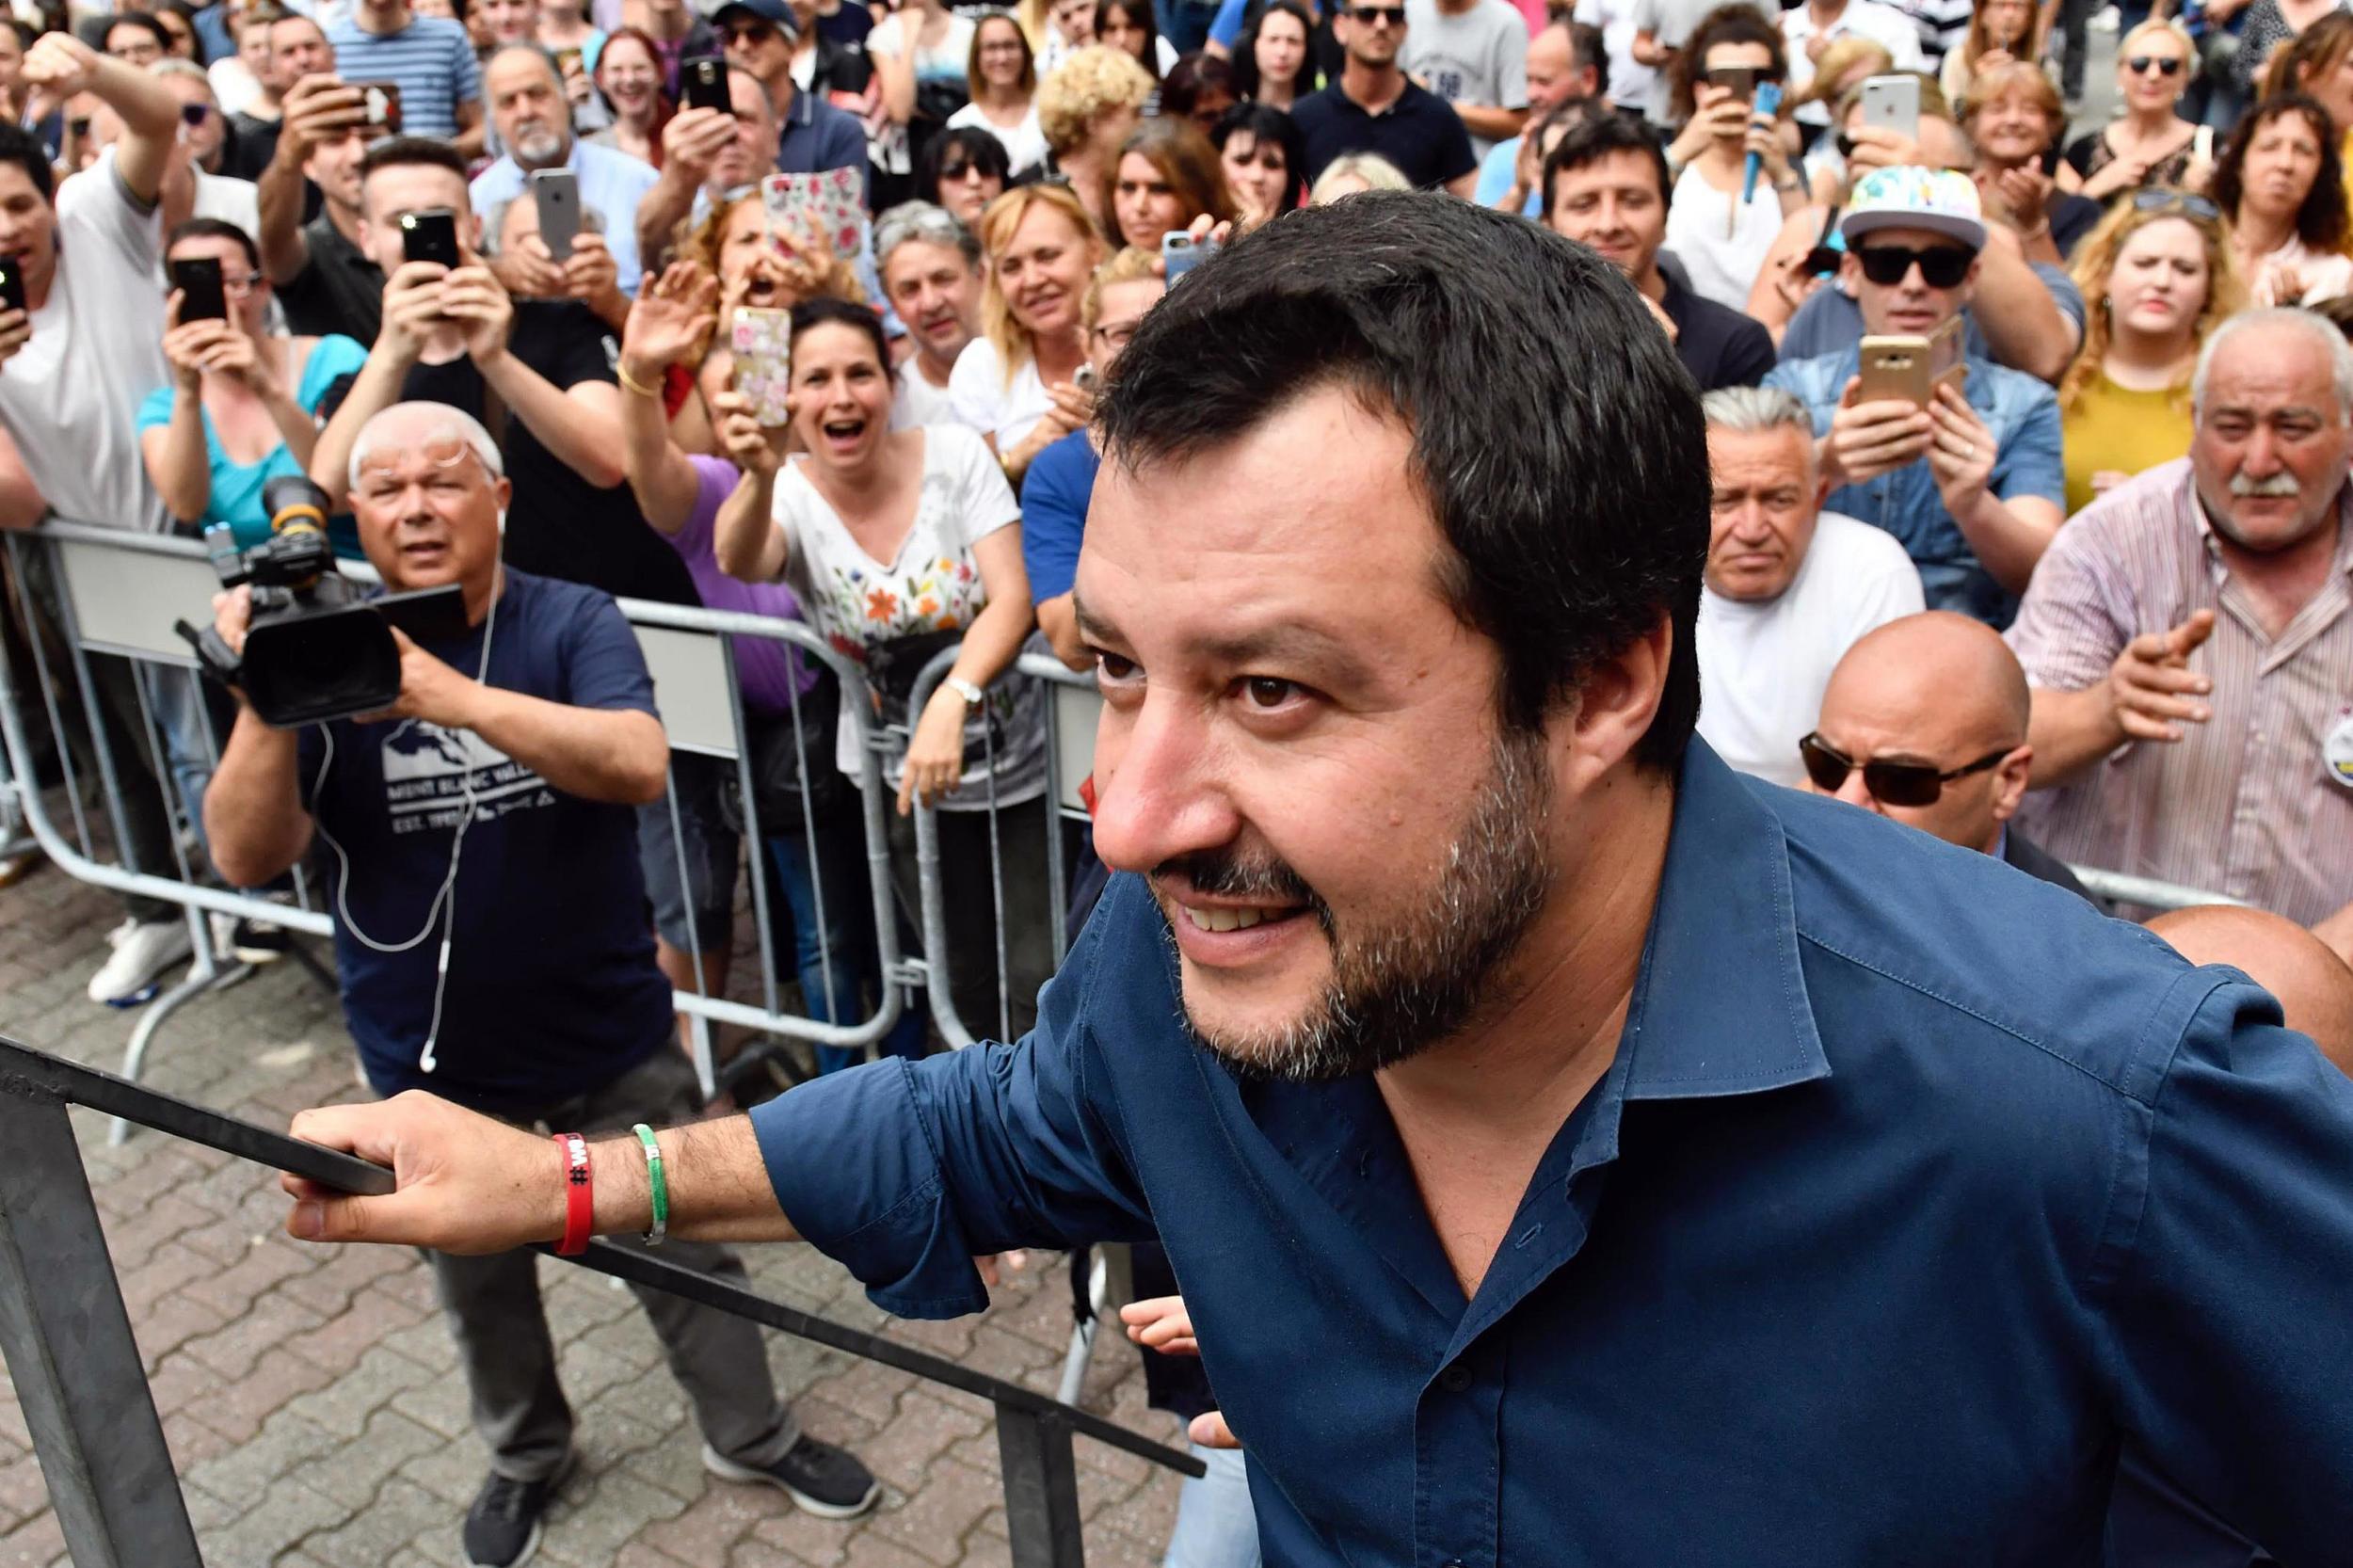 Without providing evidence, interior minister Matteo Salvini has said vaccinations can be dangerous